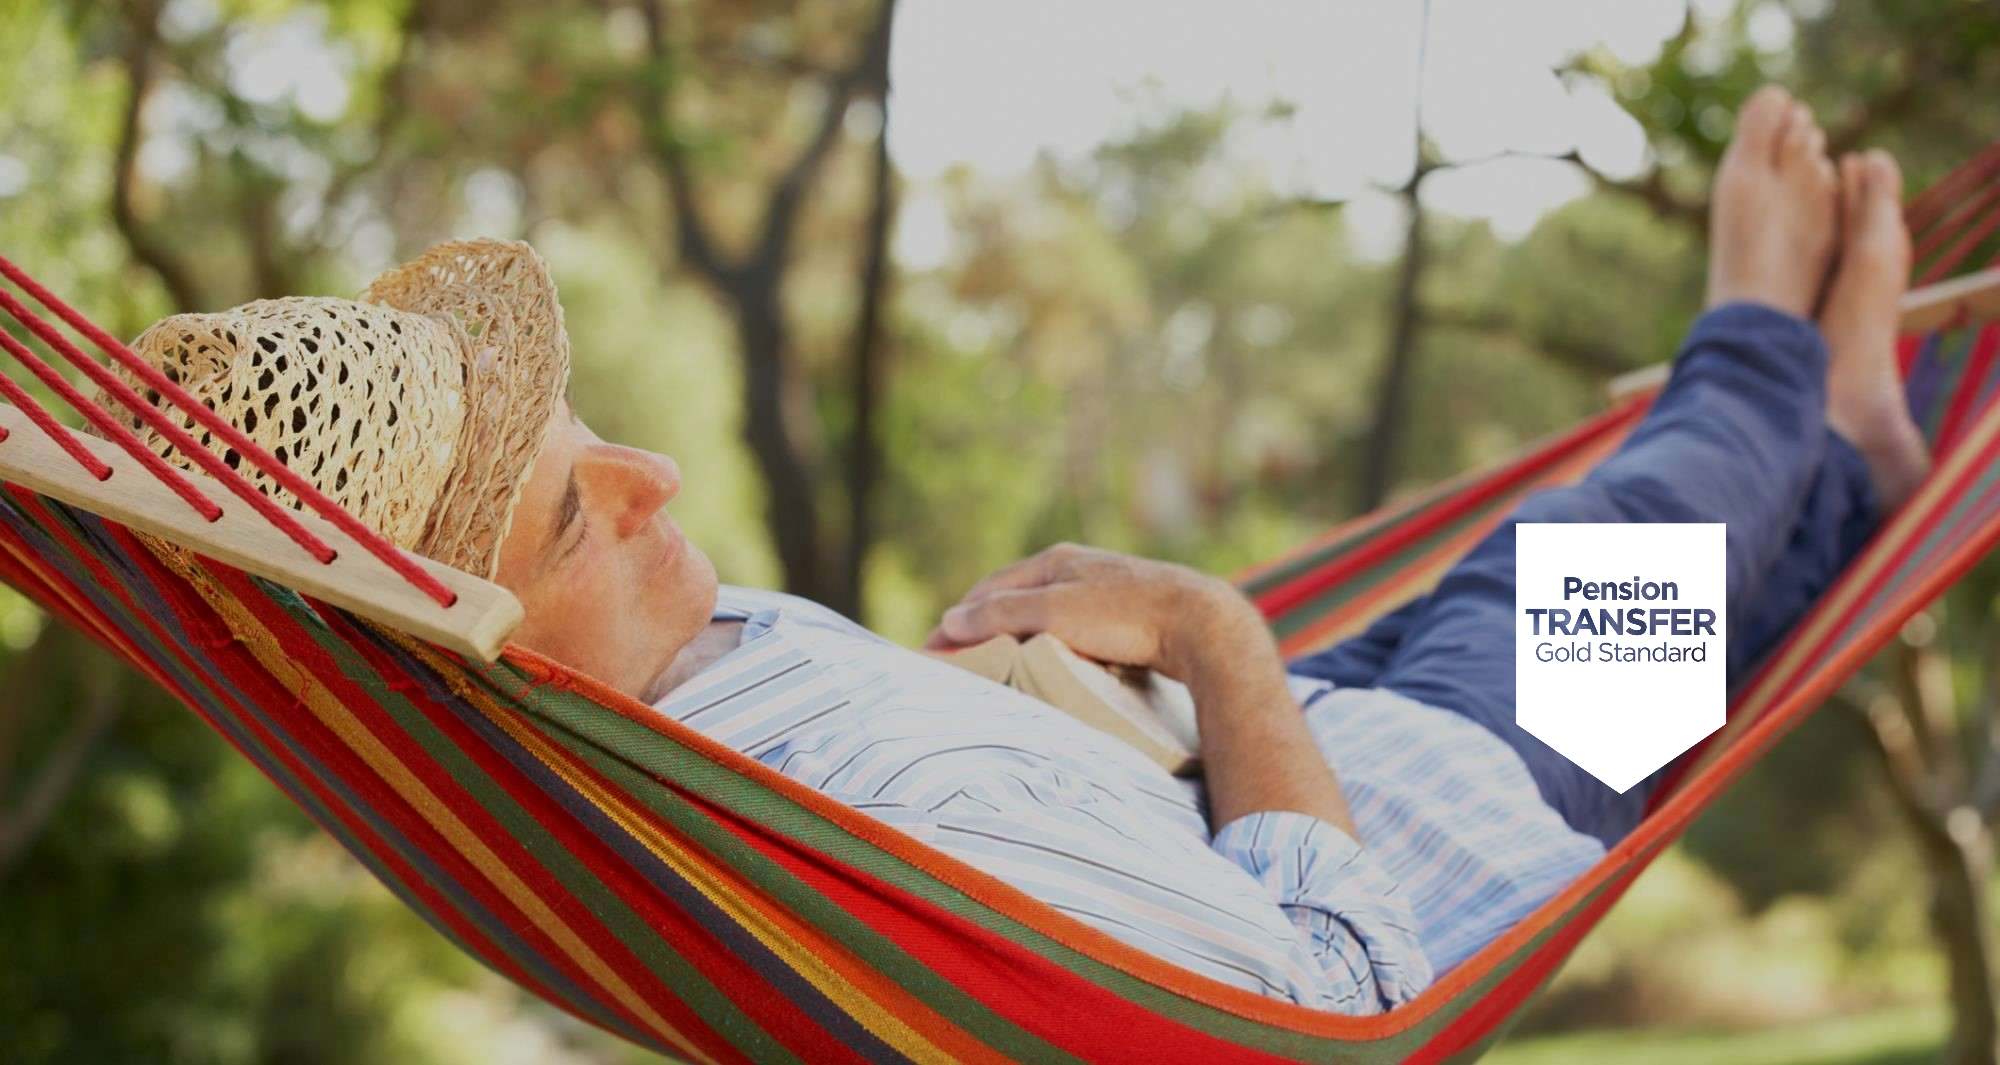 Planning a comfortable, not taxing retirement?